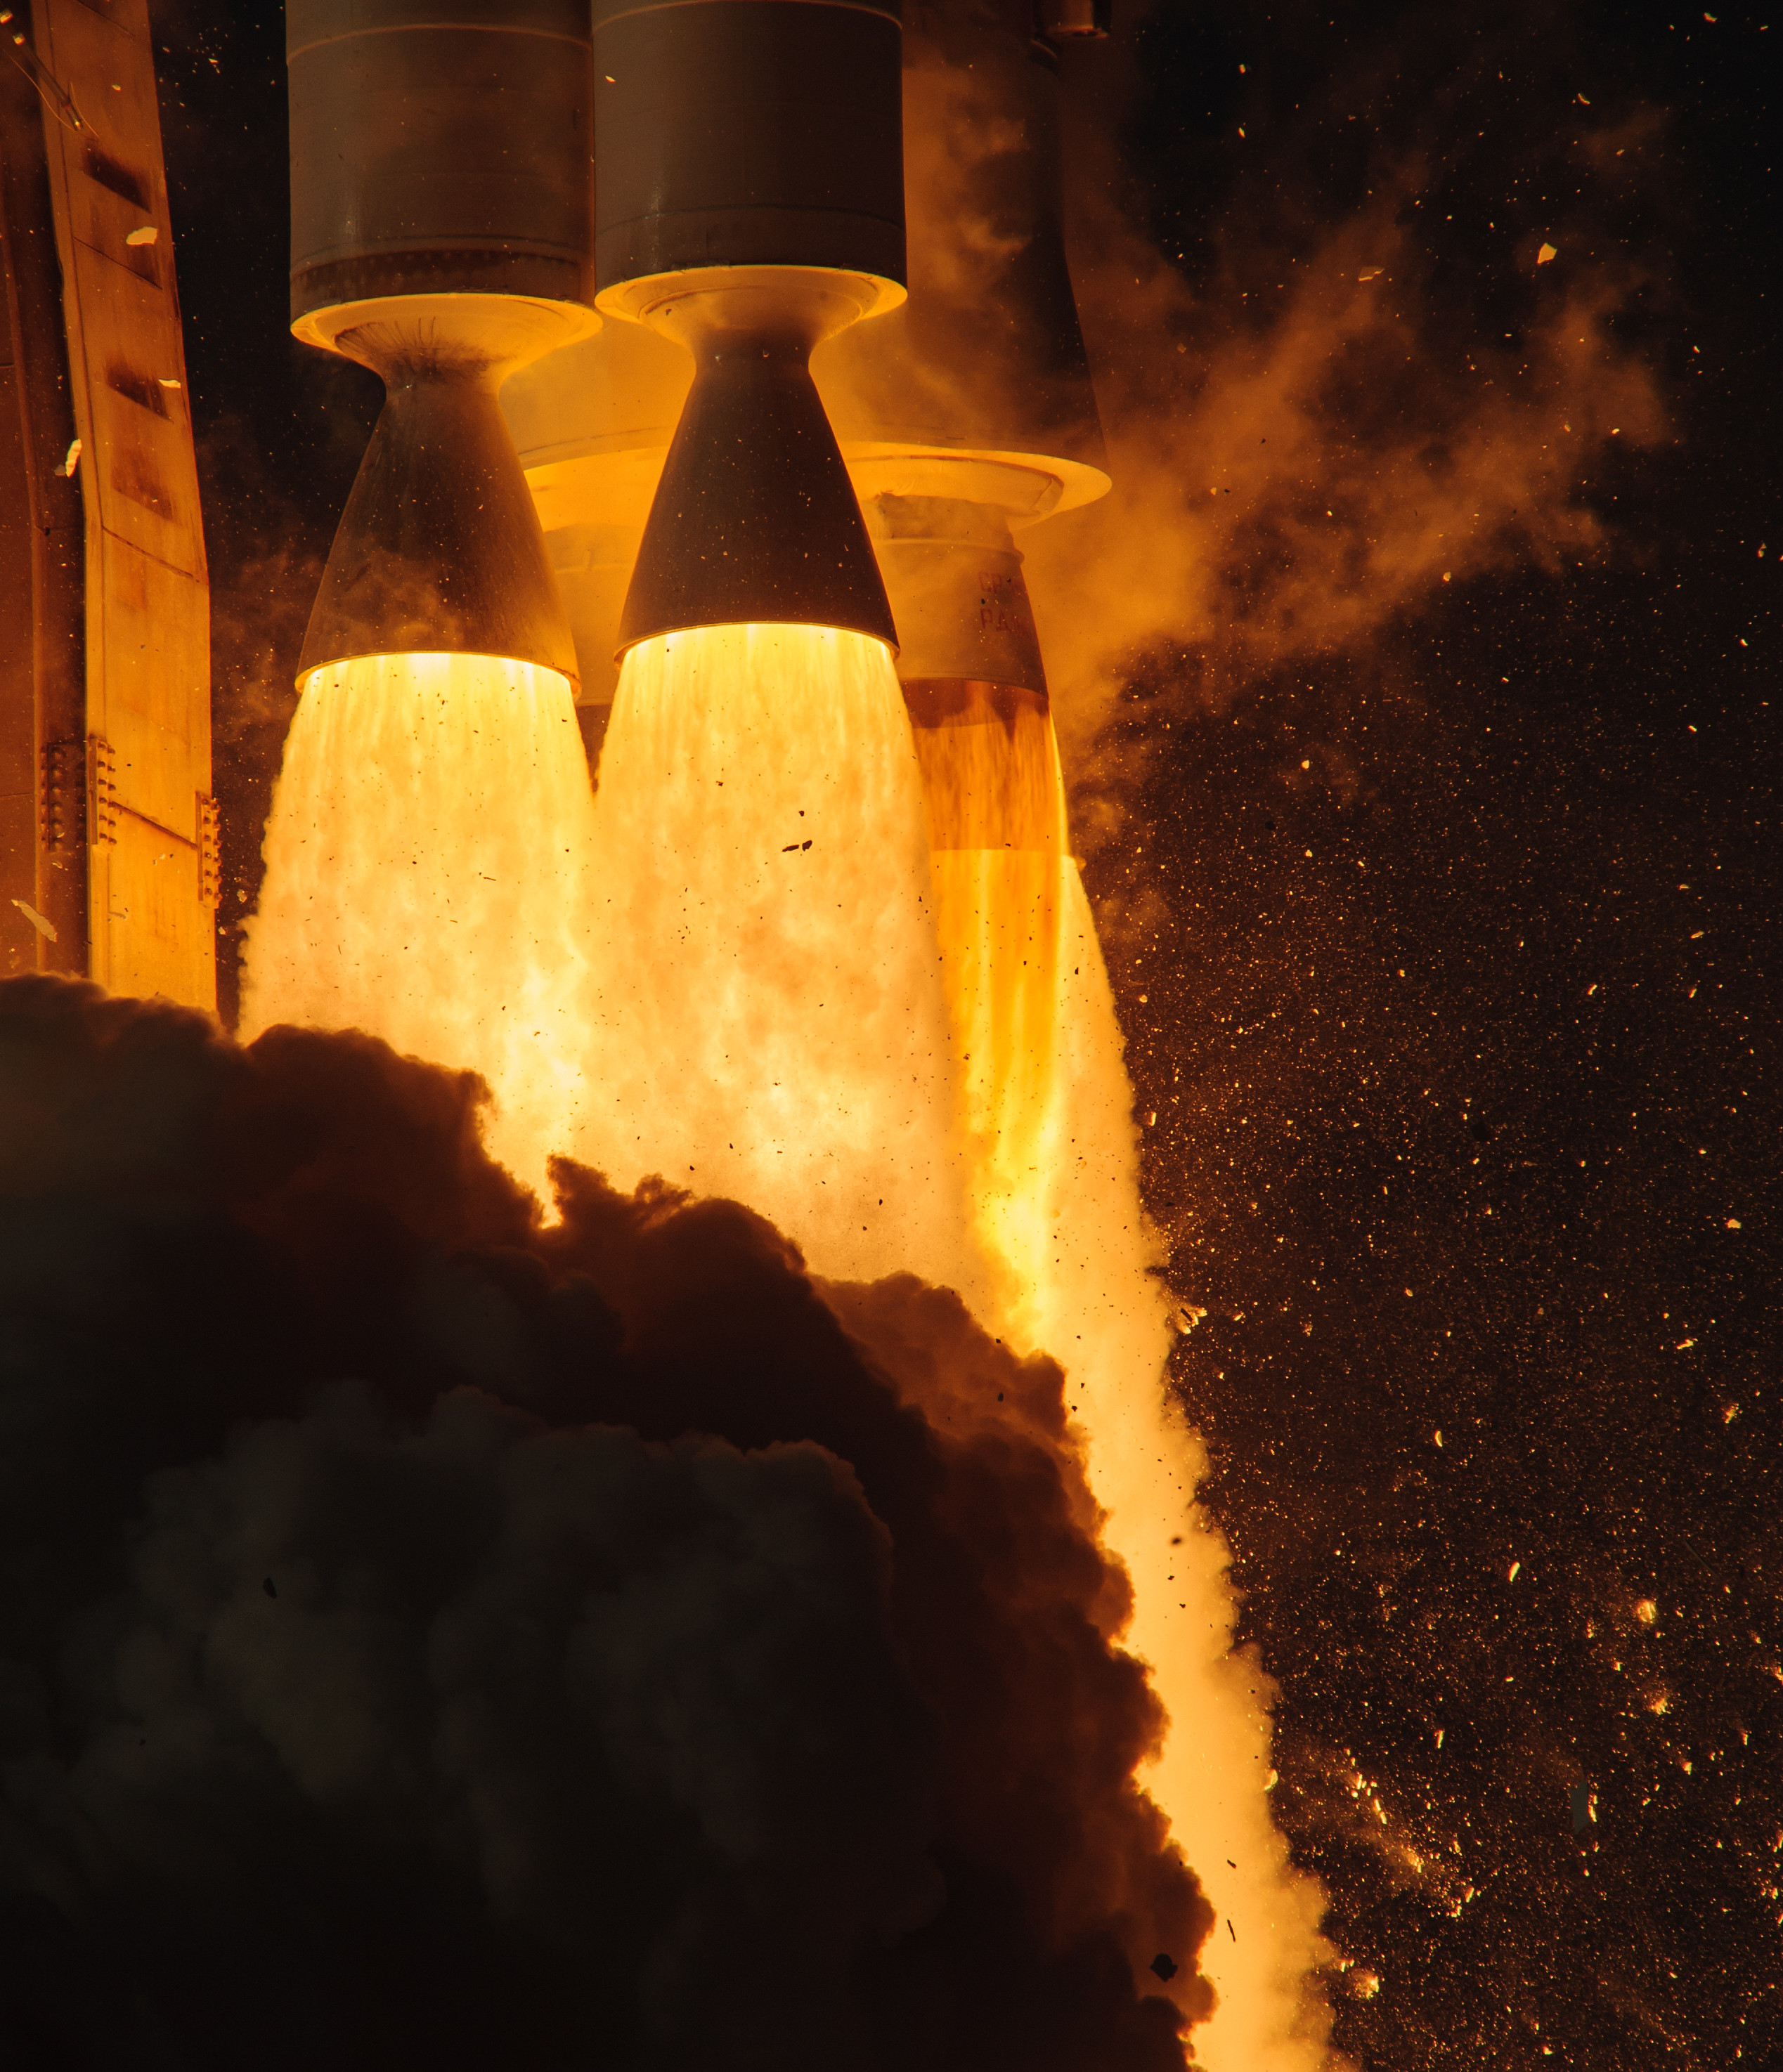 A close-up view of the 4 first-stage engines blasting out an orange firey thrust against a black background.